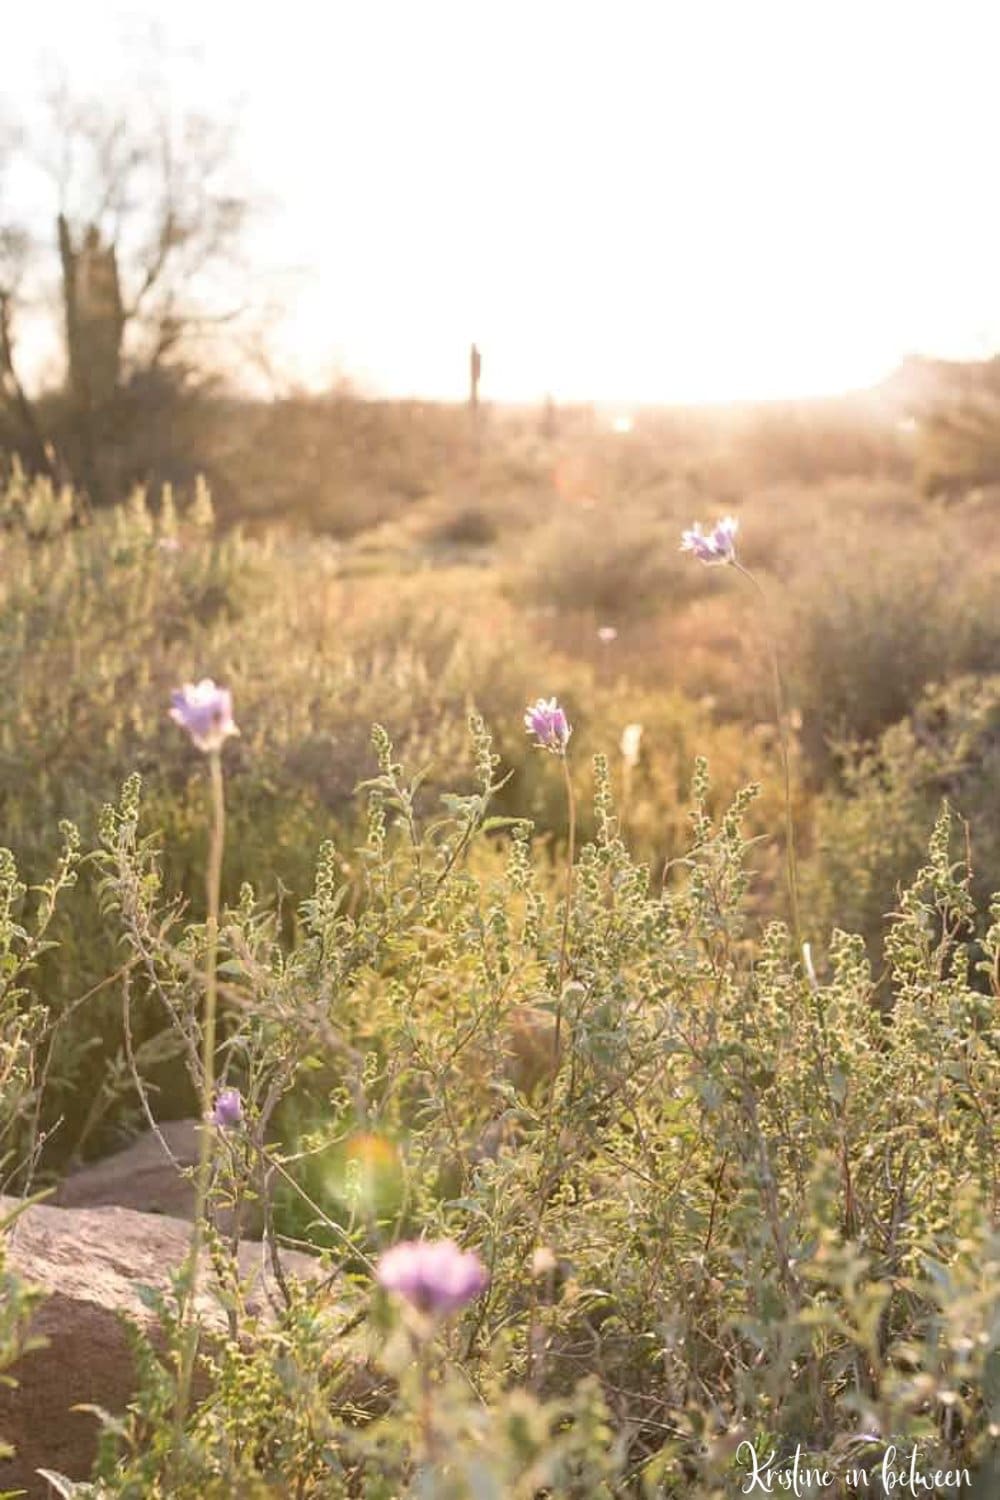 A sunlit desert with purple flowers and a saguaro cactus in the background